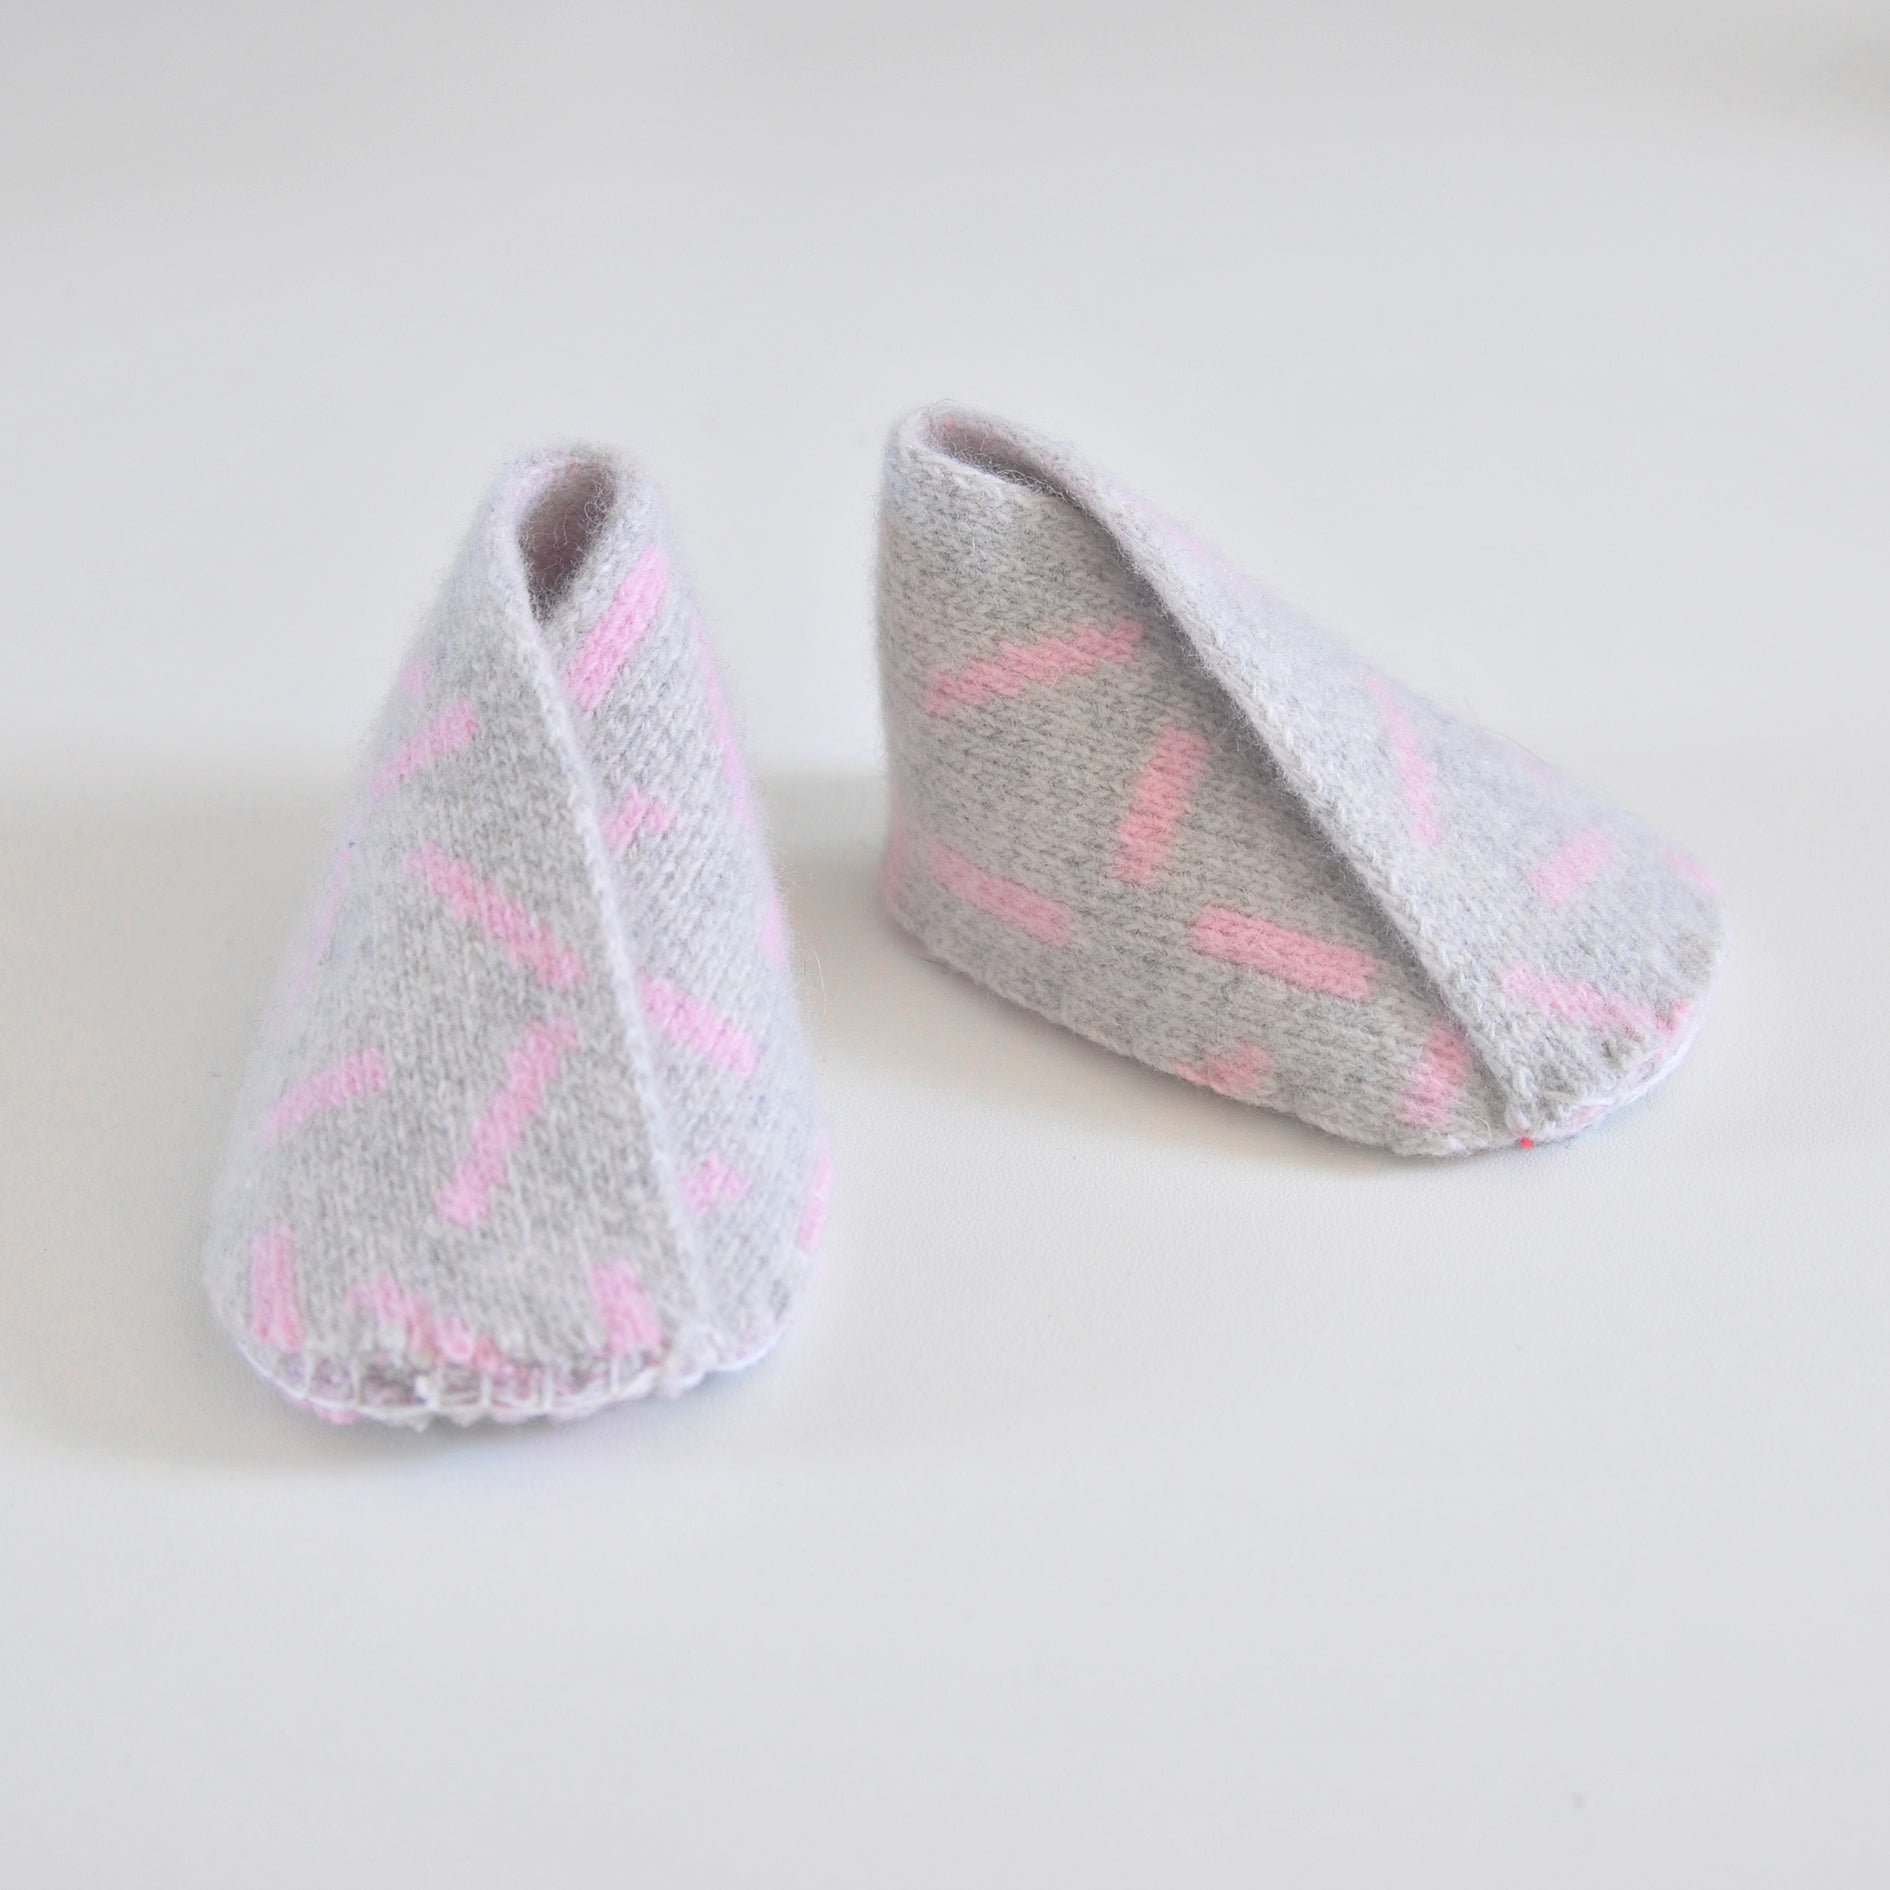 DASH BABY BOOTIE IN GREY AND PINK